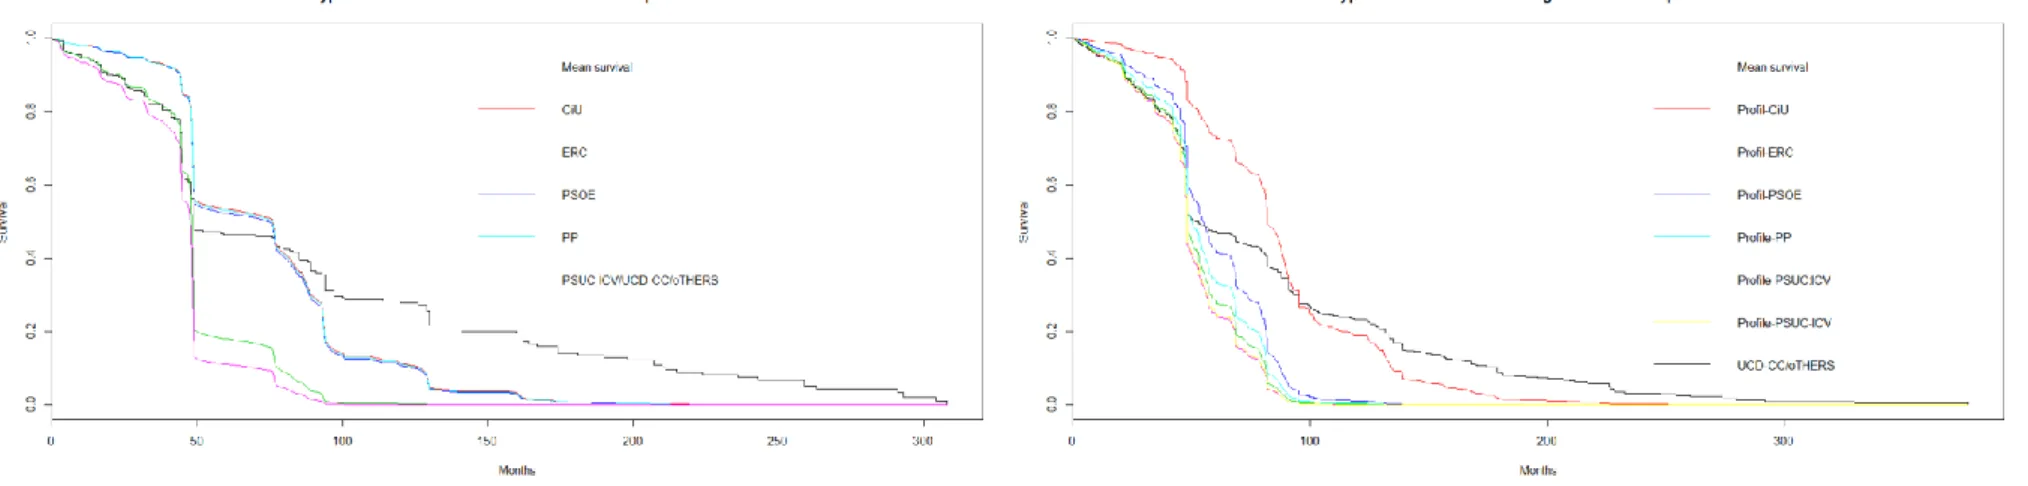 Figure 3a. Ideal-types of survival curves in Catalonia and Walloon, by political party 